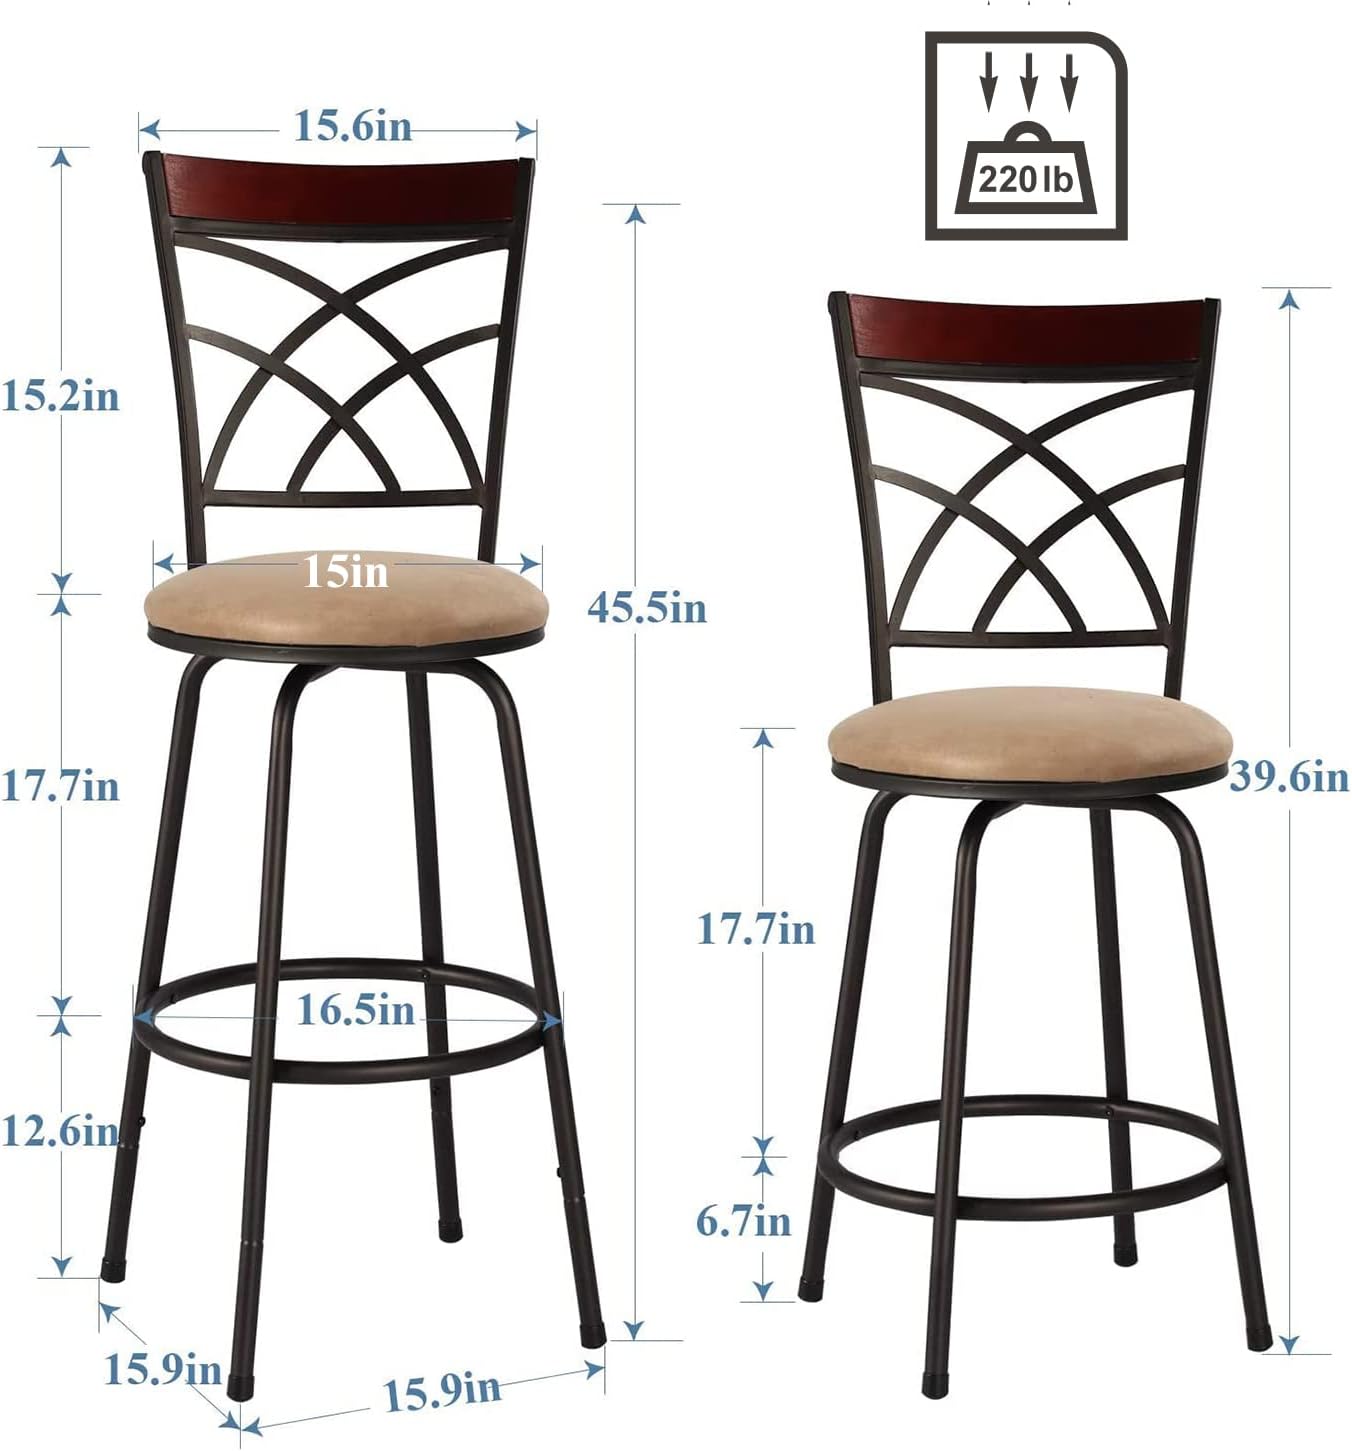 VECELO Adjustable Bar Stools with 360 Degree Swivel Round Seat Cushions and Wood Top Rail Backrest Set of 2